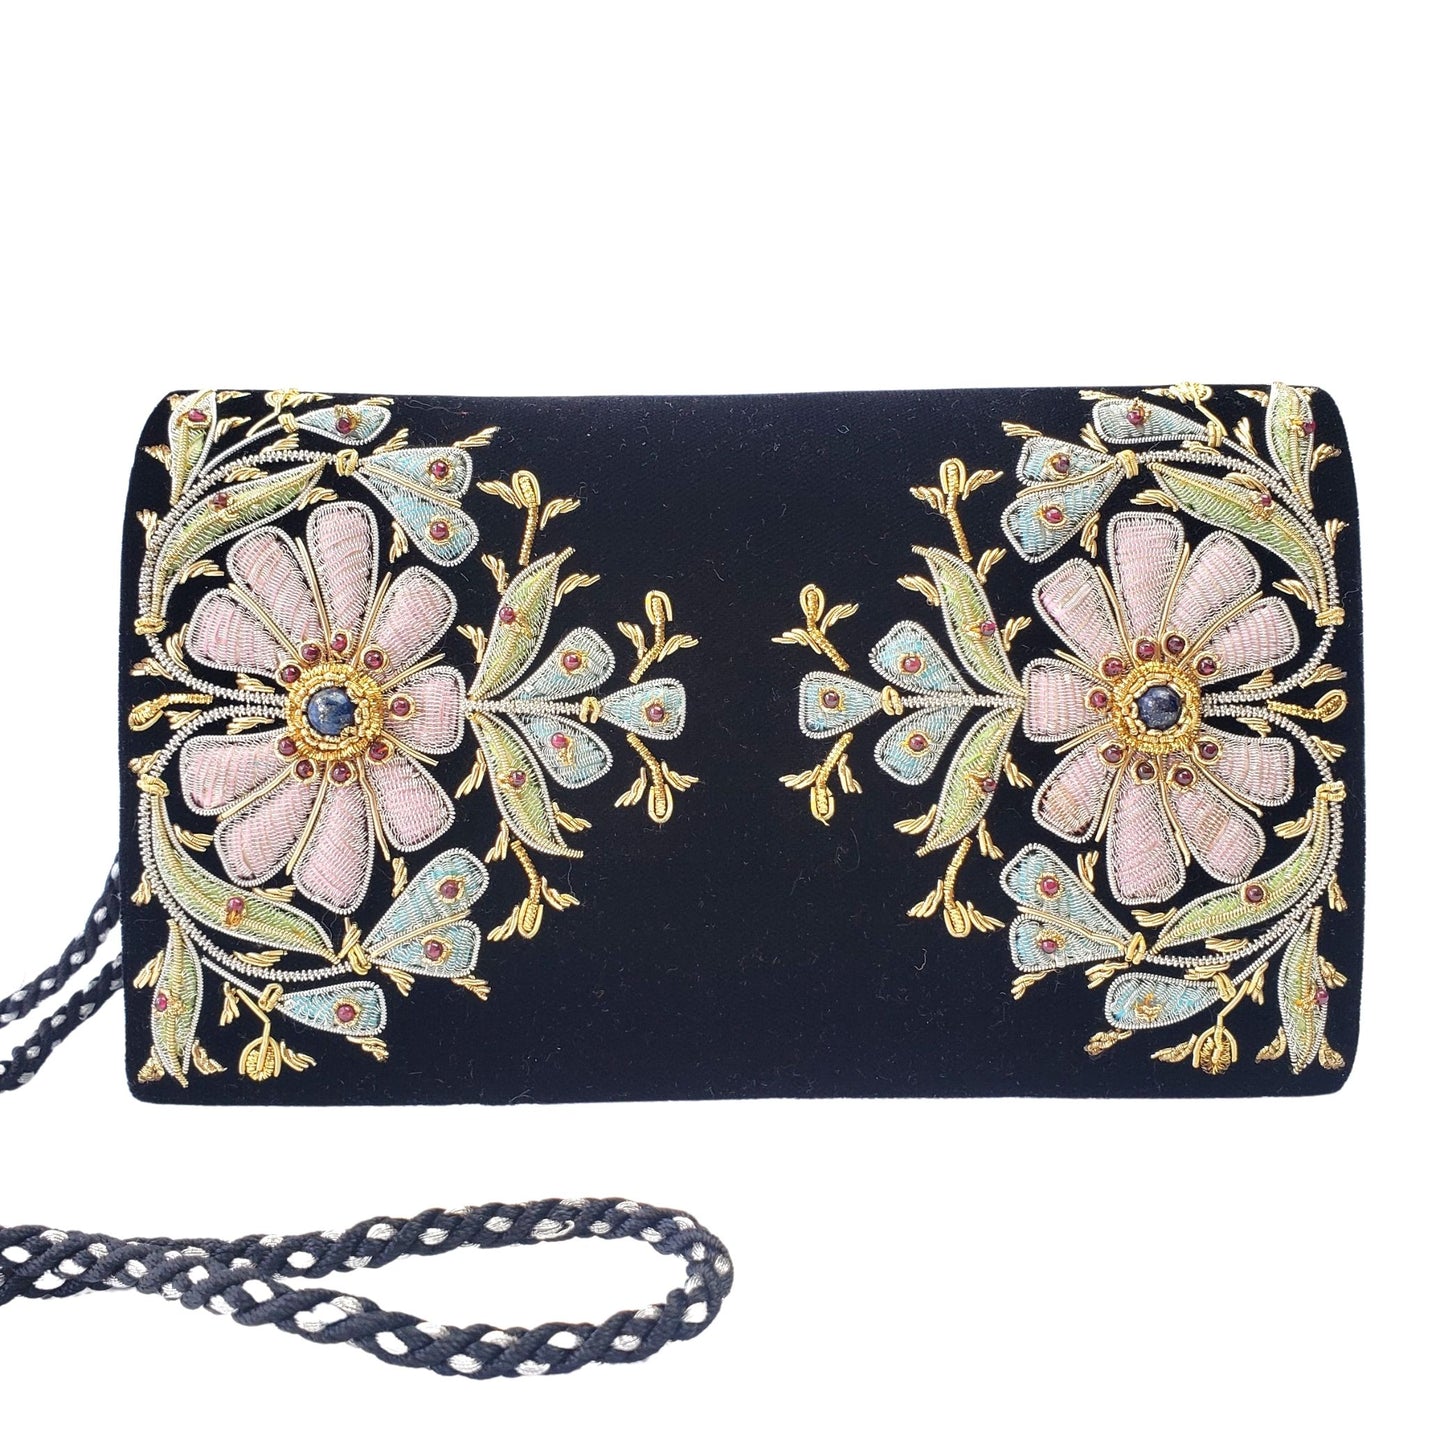 Embroidered black velvet clutch with pink flowers and inlaid with lapis lazuli and garnet gemstones, zardozi purse. 